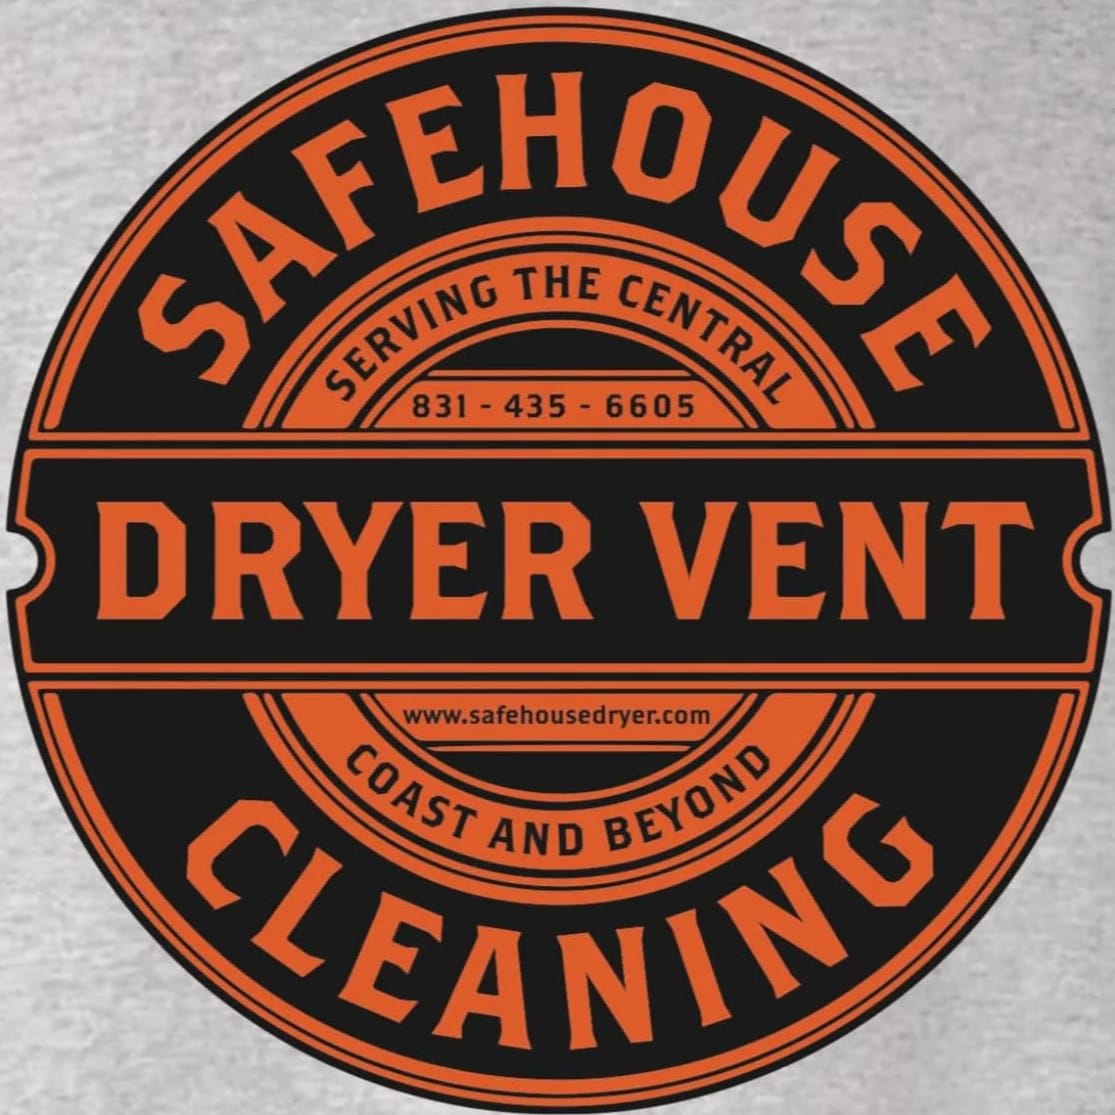 Safehouse Dryer Vent Cleaning LLC